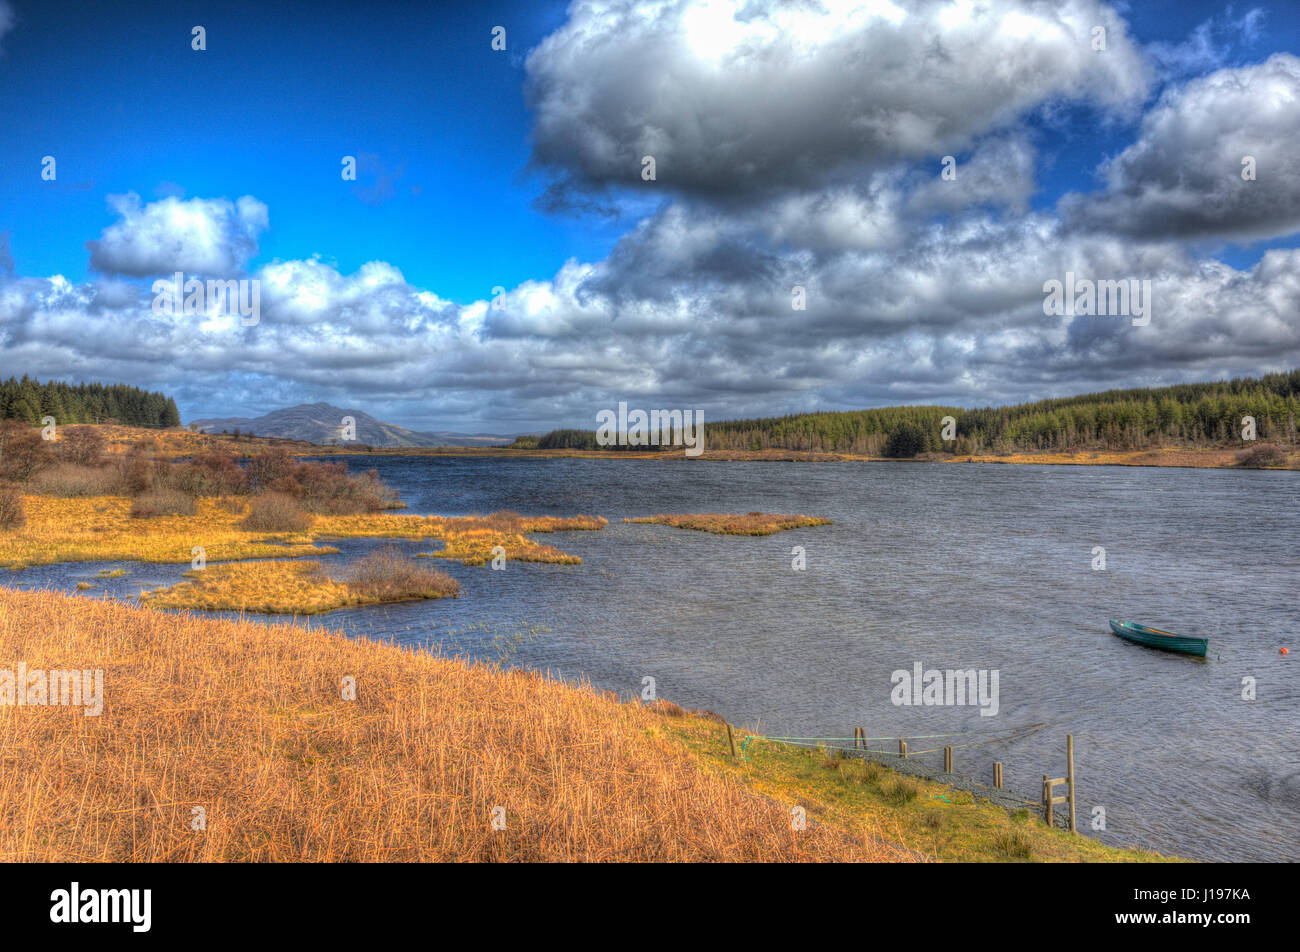 Scottish loch Isle of Mull with one rowing boat and cloudscape in hdr Stock Photo